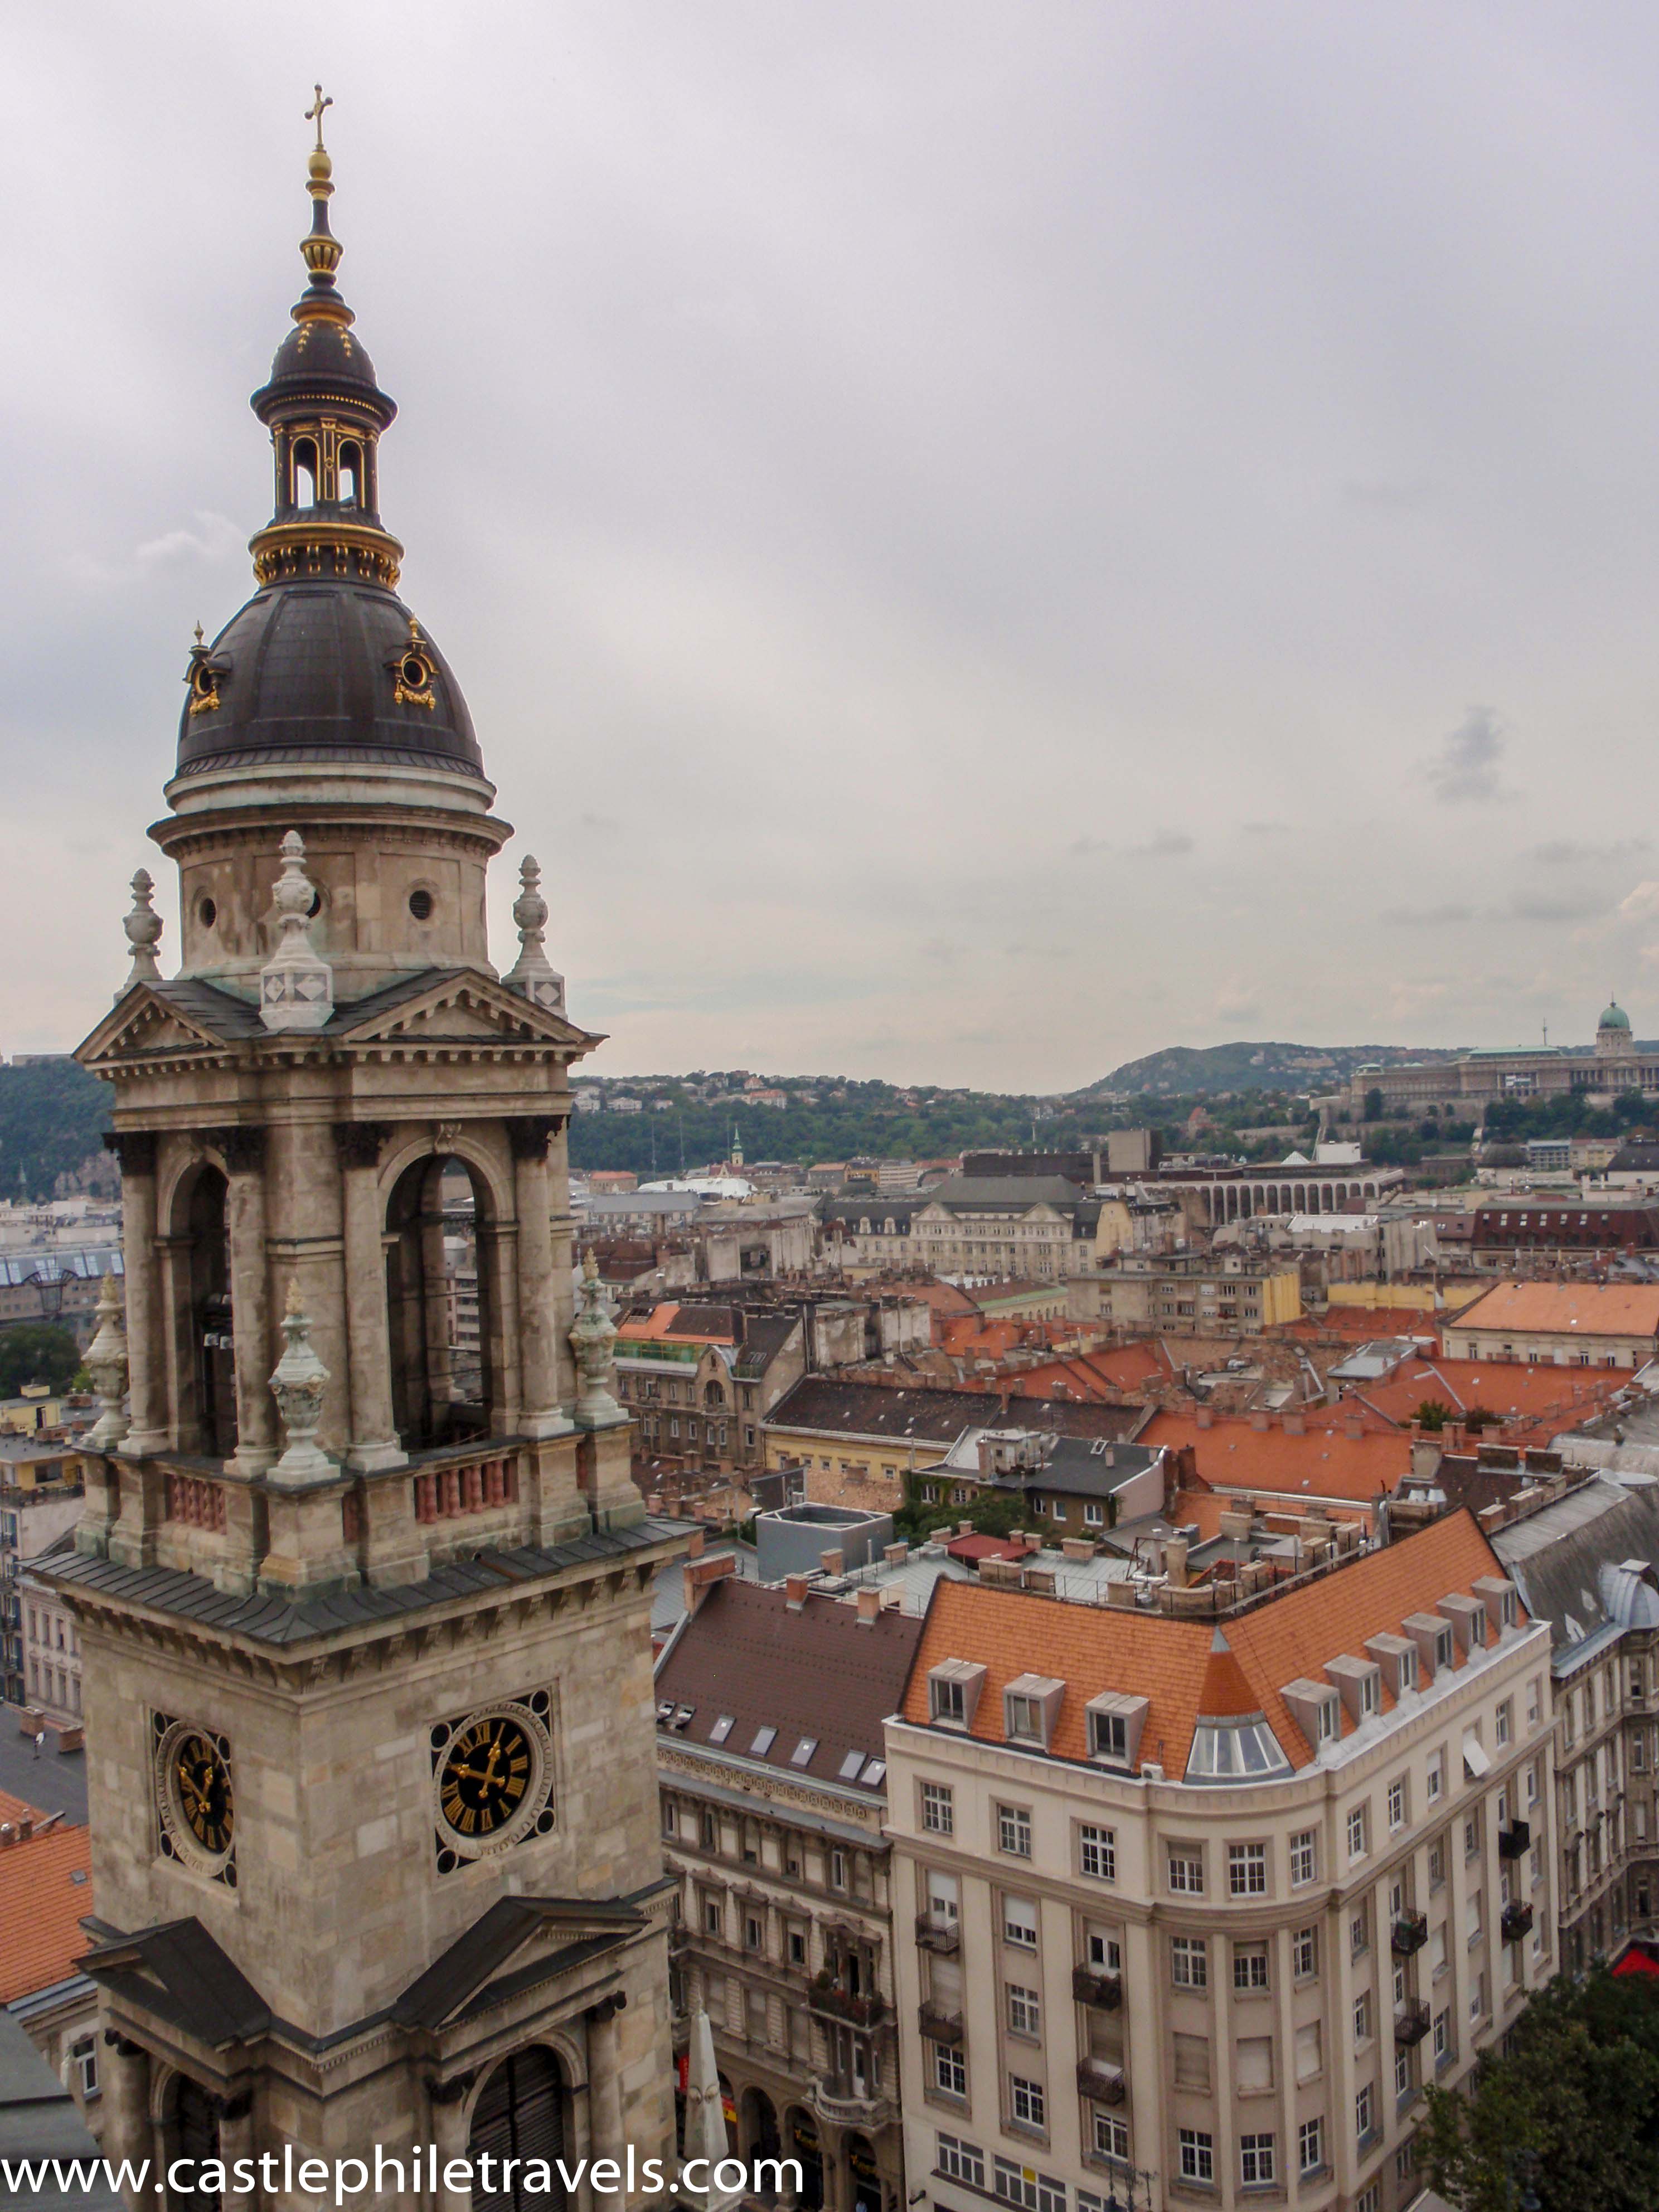 Overlooking Budapest from the dome of St Stephen's Basilica